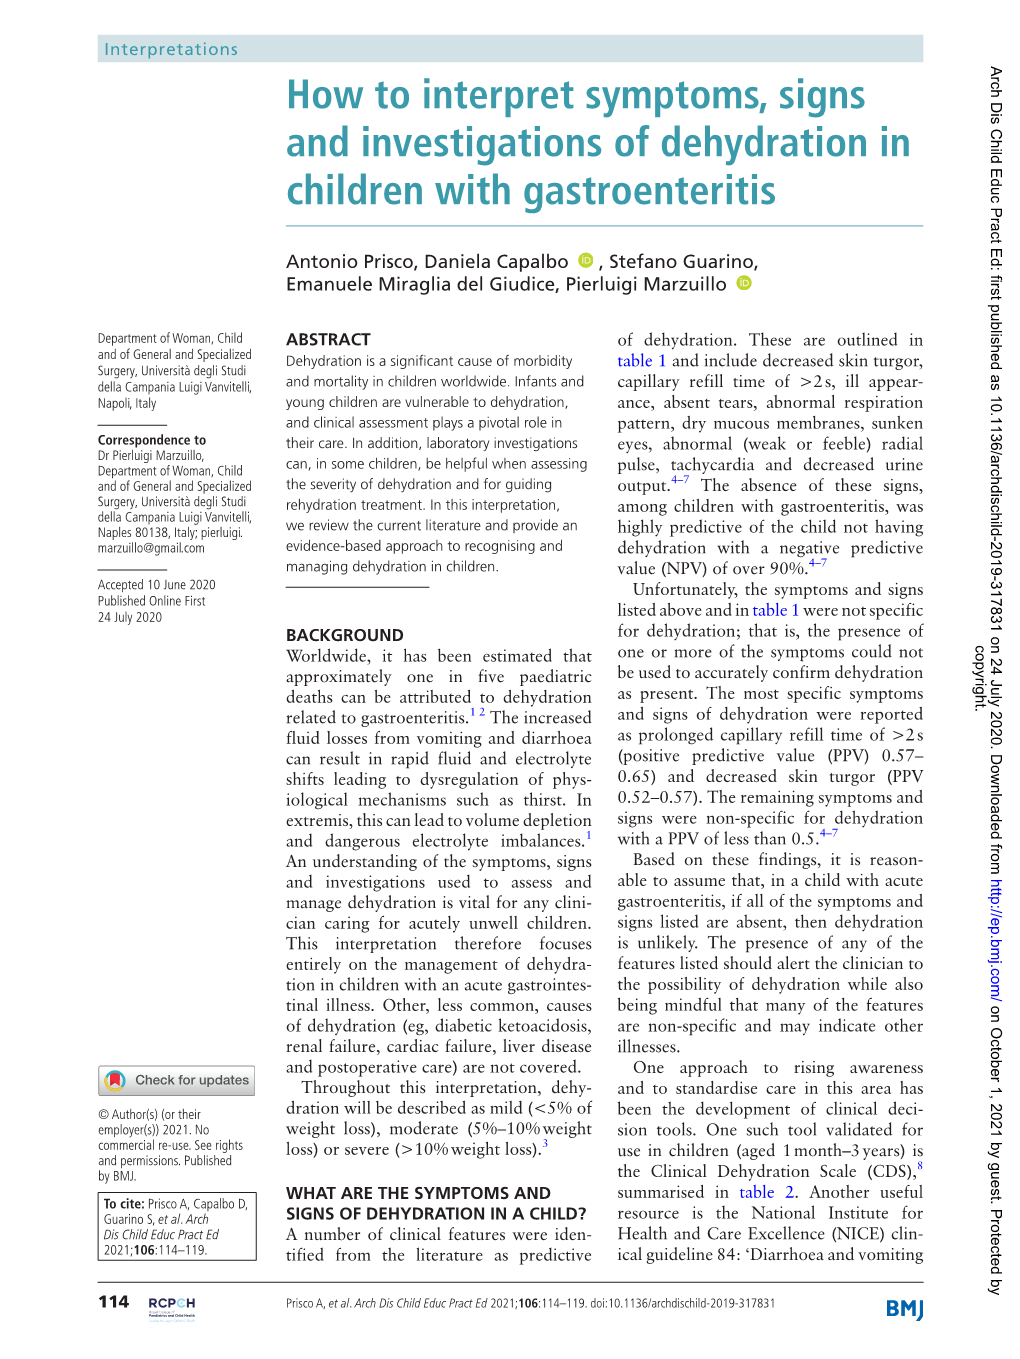 How to Interpret Symptoms, Signs and Investigations of Dehydration in Children with Gastroenteritis